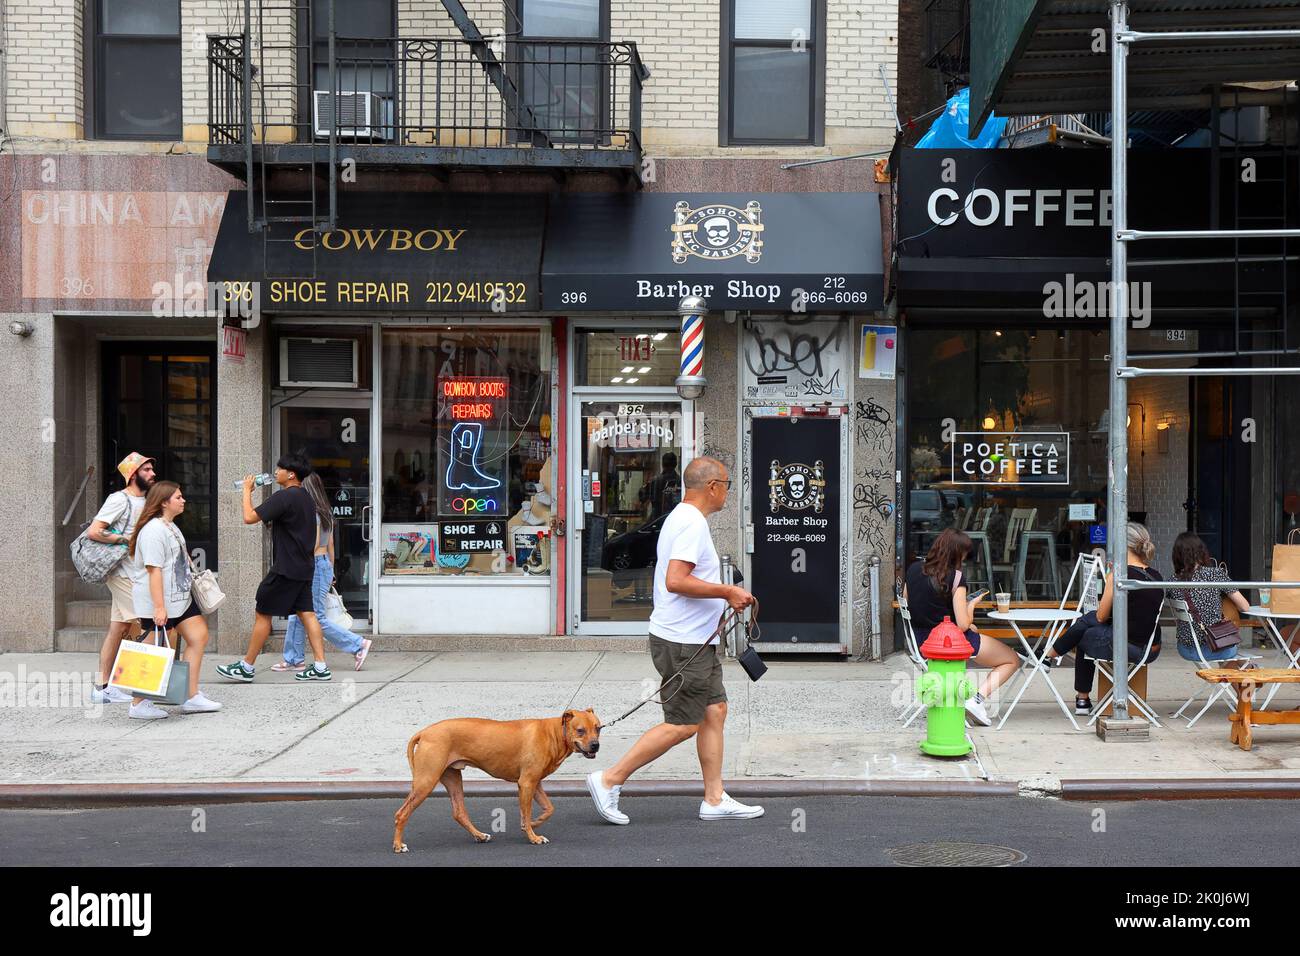 Poetica Coffee, 394 Broome St, Cowboy Shoe Repair, 396 Broome St, New York. people and storefronts in Manhattan NoHo, Little Italy, Chinatown Stock Photo